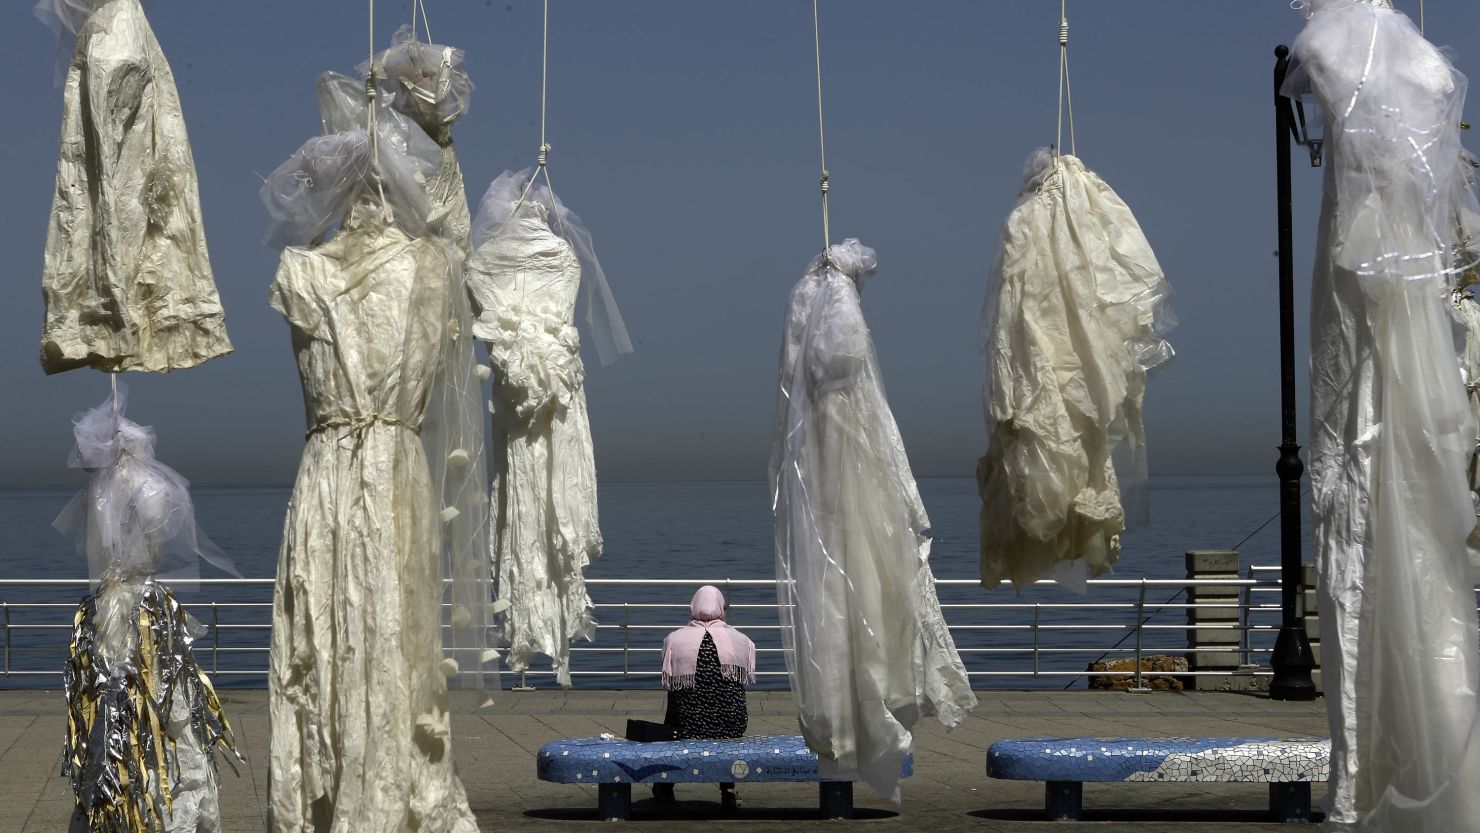 Wedding dresses hang from nooses in Beirut during a protest against marriage rape laws.